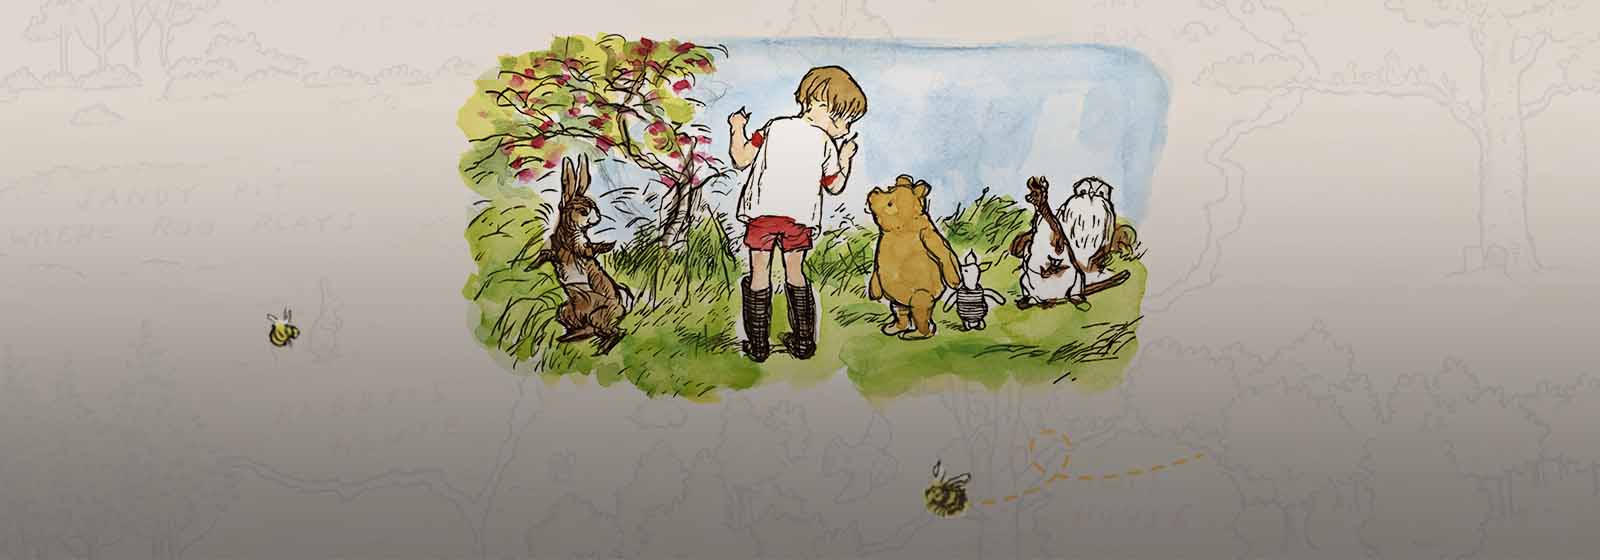 LEARN MORE ABOUT WINNIE THE POOH & FRIENDS